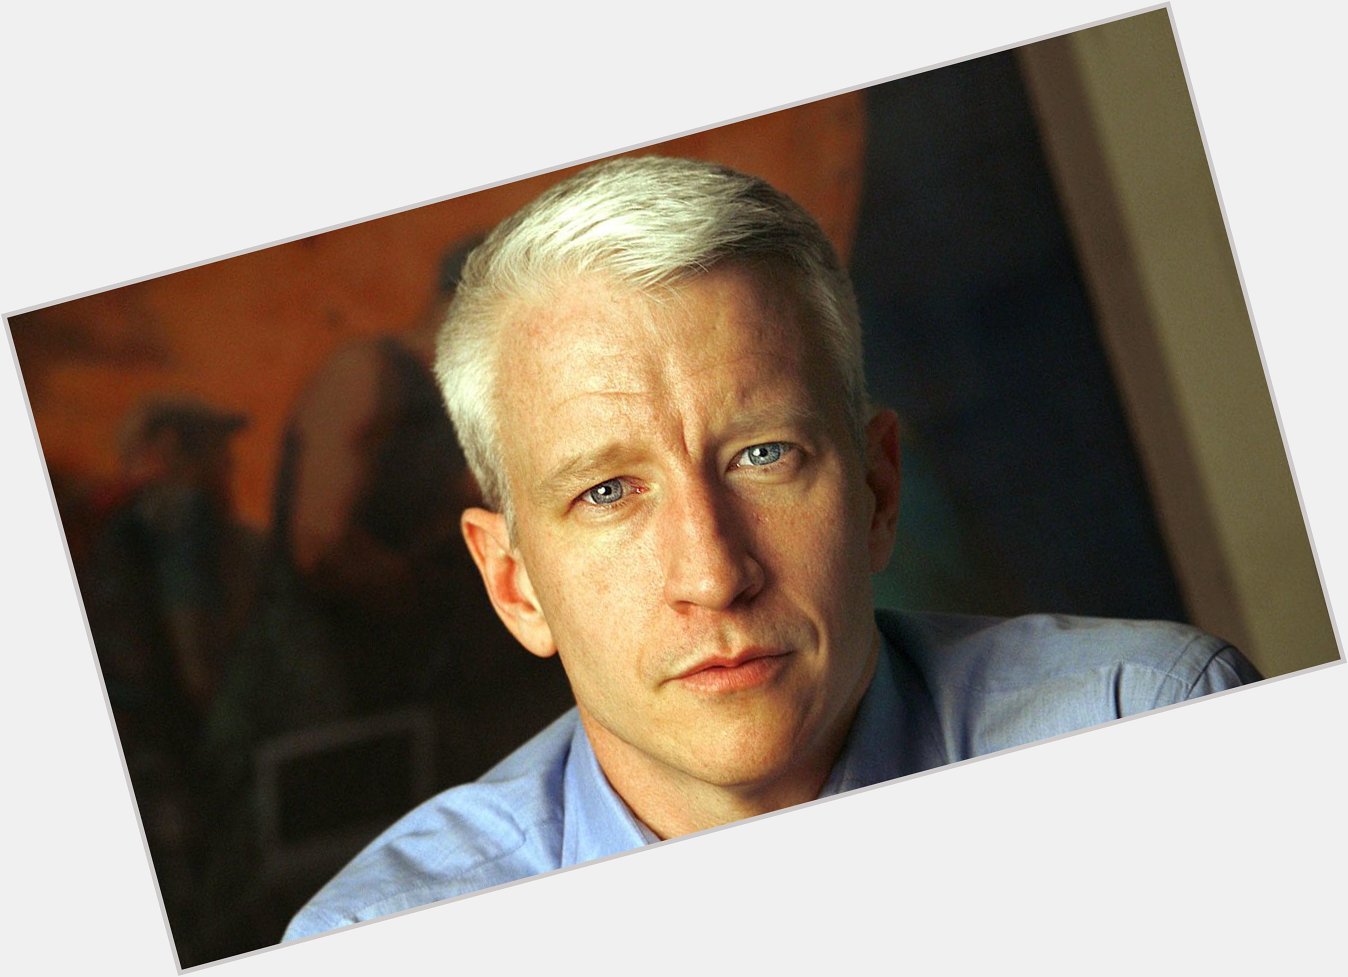 Happy 50th birthday to Anderson Cooper!  